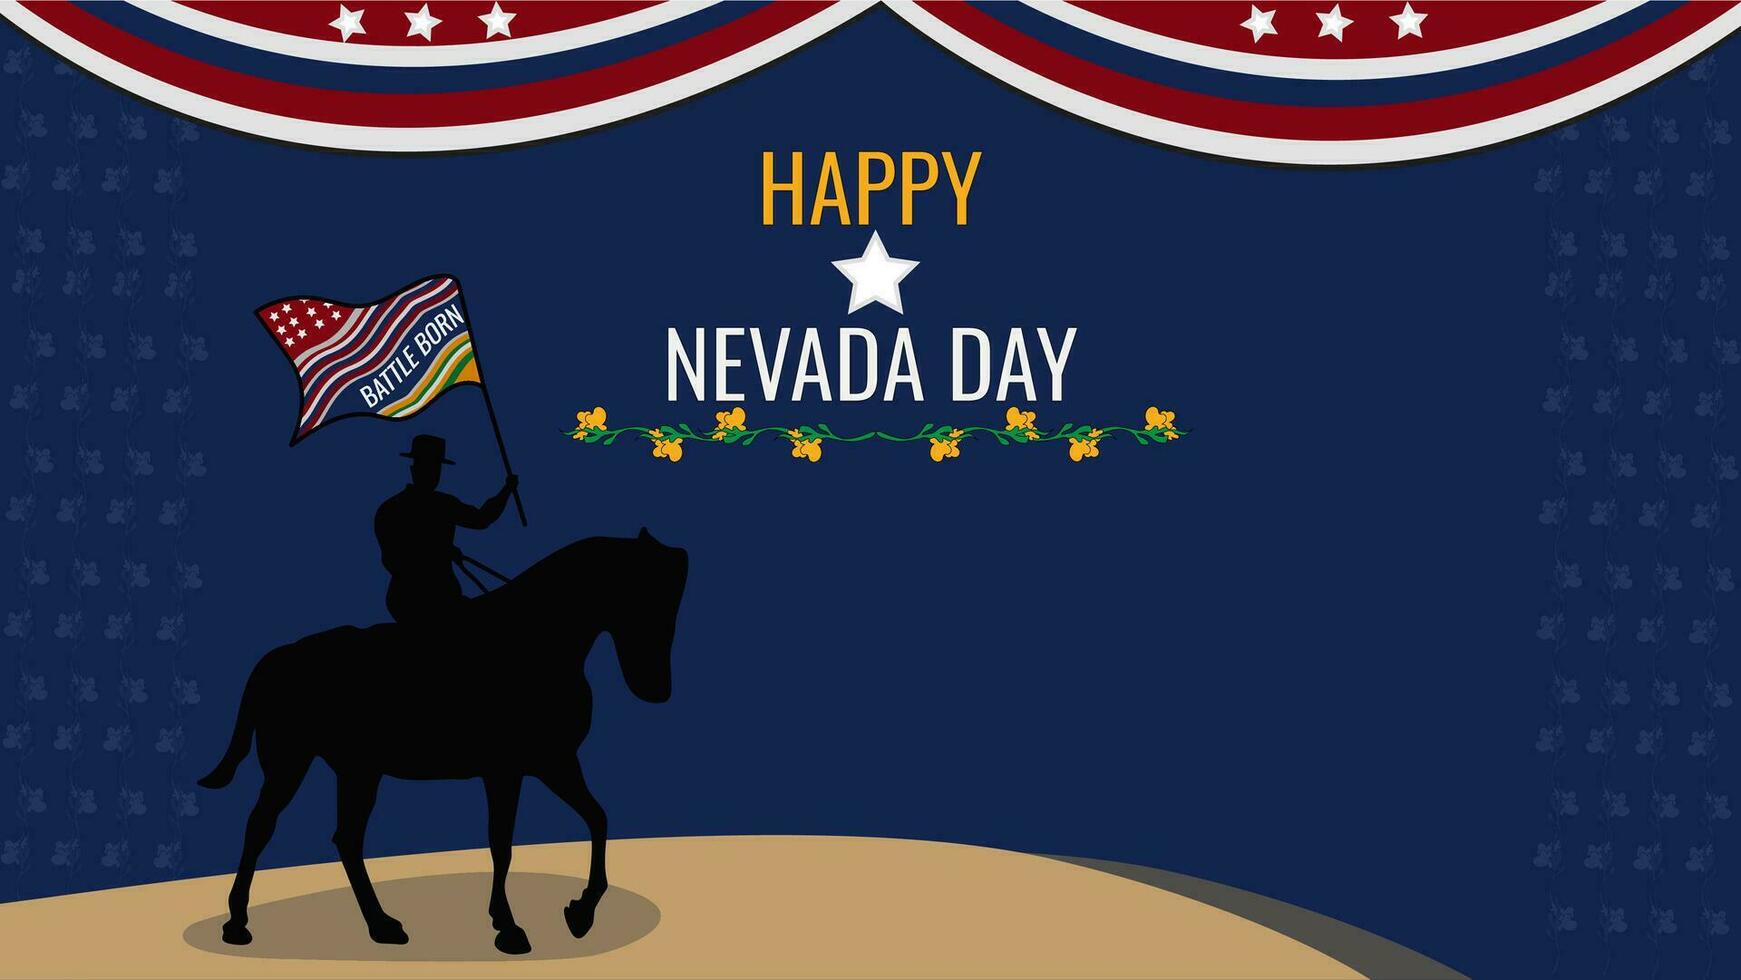 Vector illustration celebrating Nevada Day which is celebrated by United States citizens